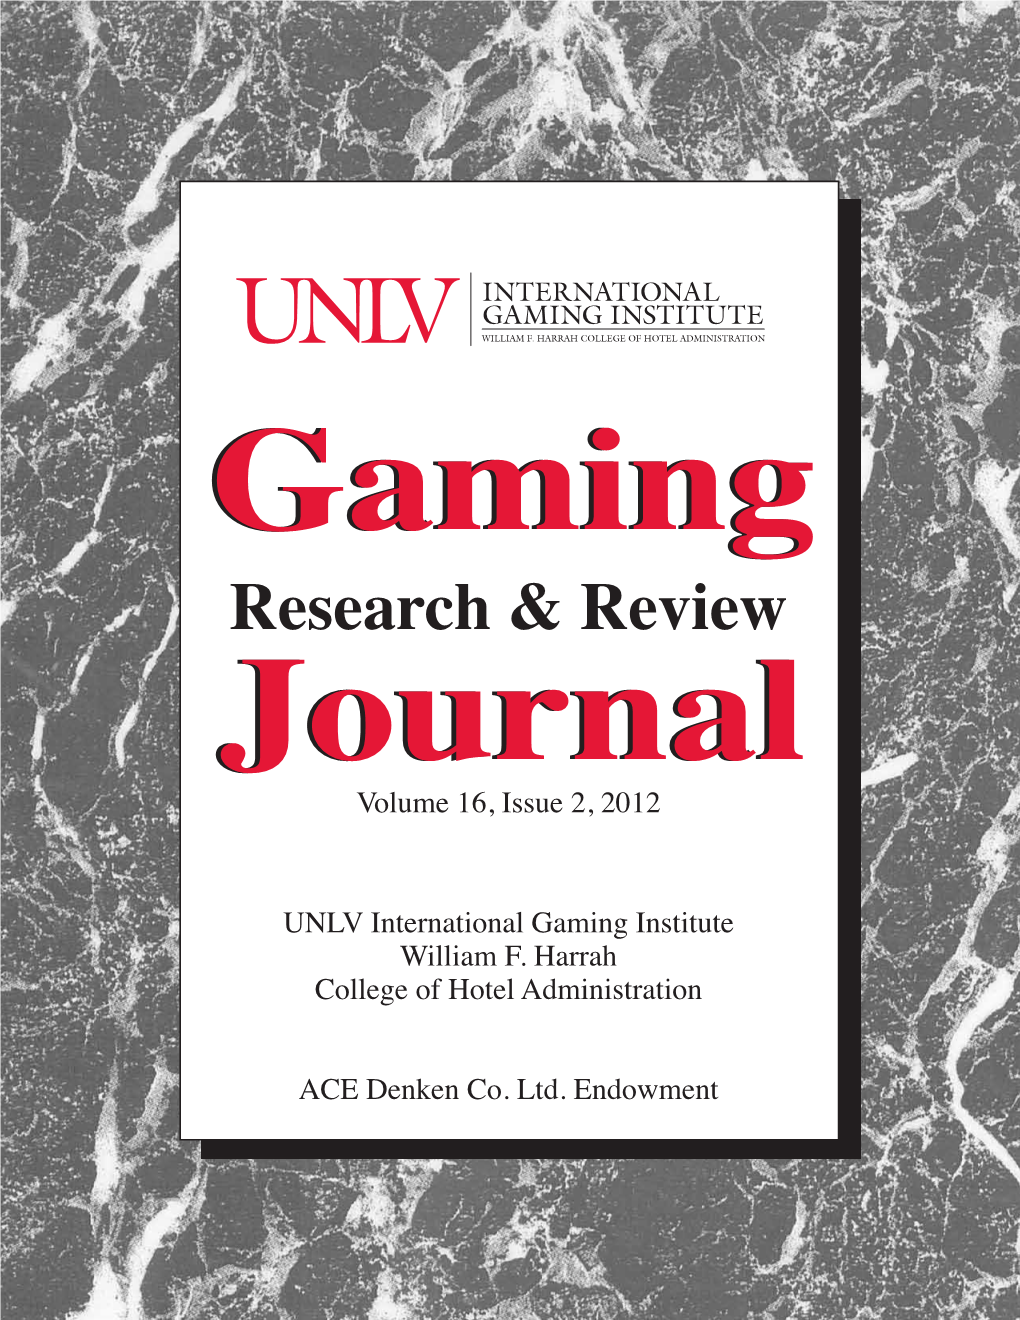 UNLV Gaming Research & Review Journal